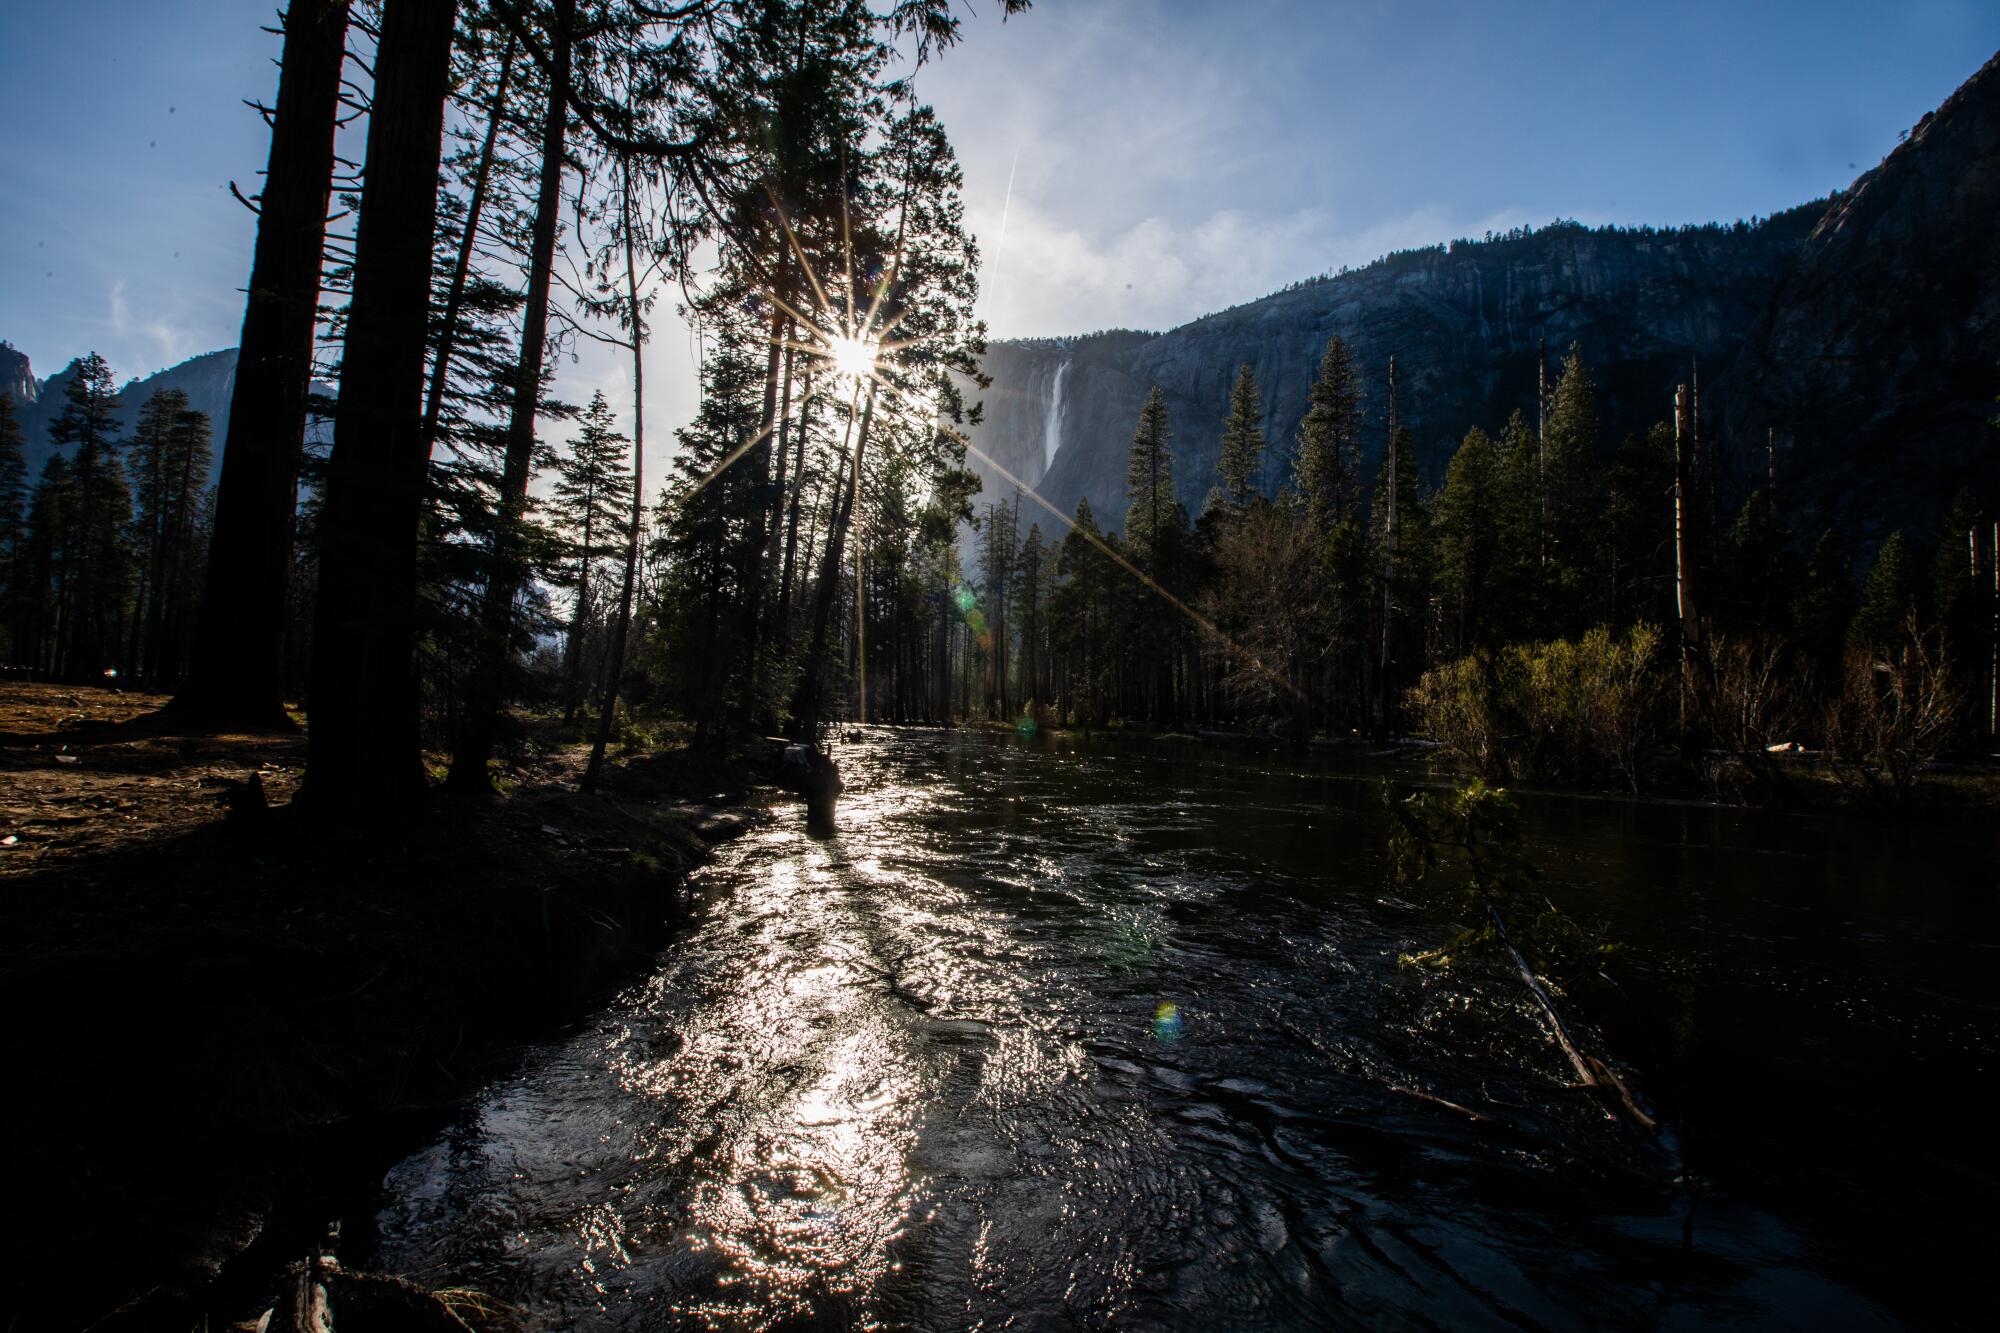 The setting sun gleams through pine trees and off the Merced River. 